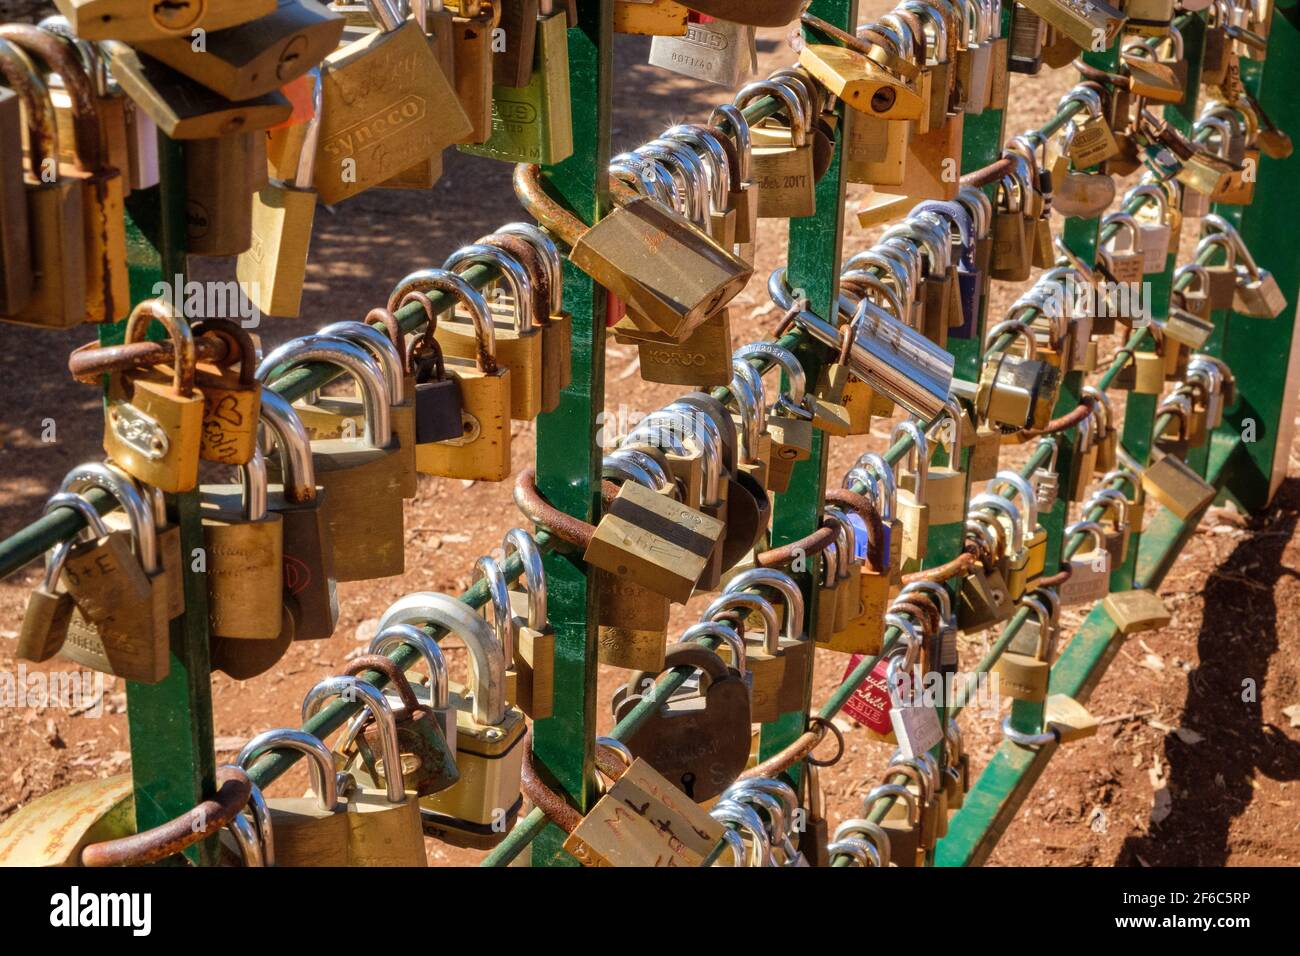 Padlocks to display couples love for each other Stock Photo